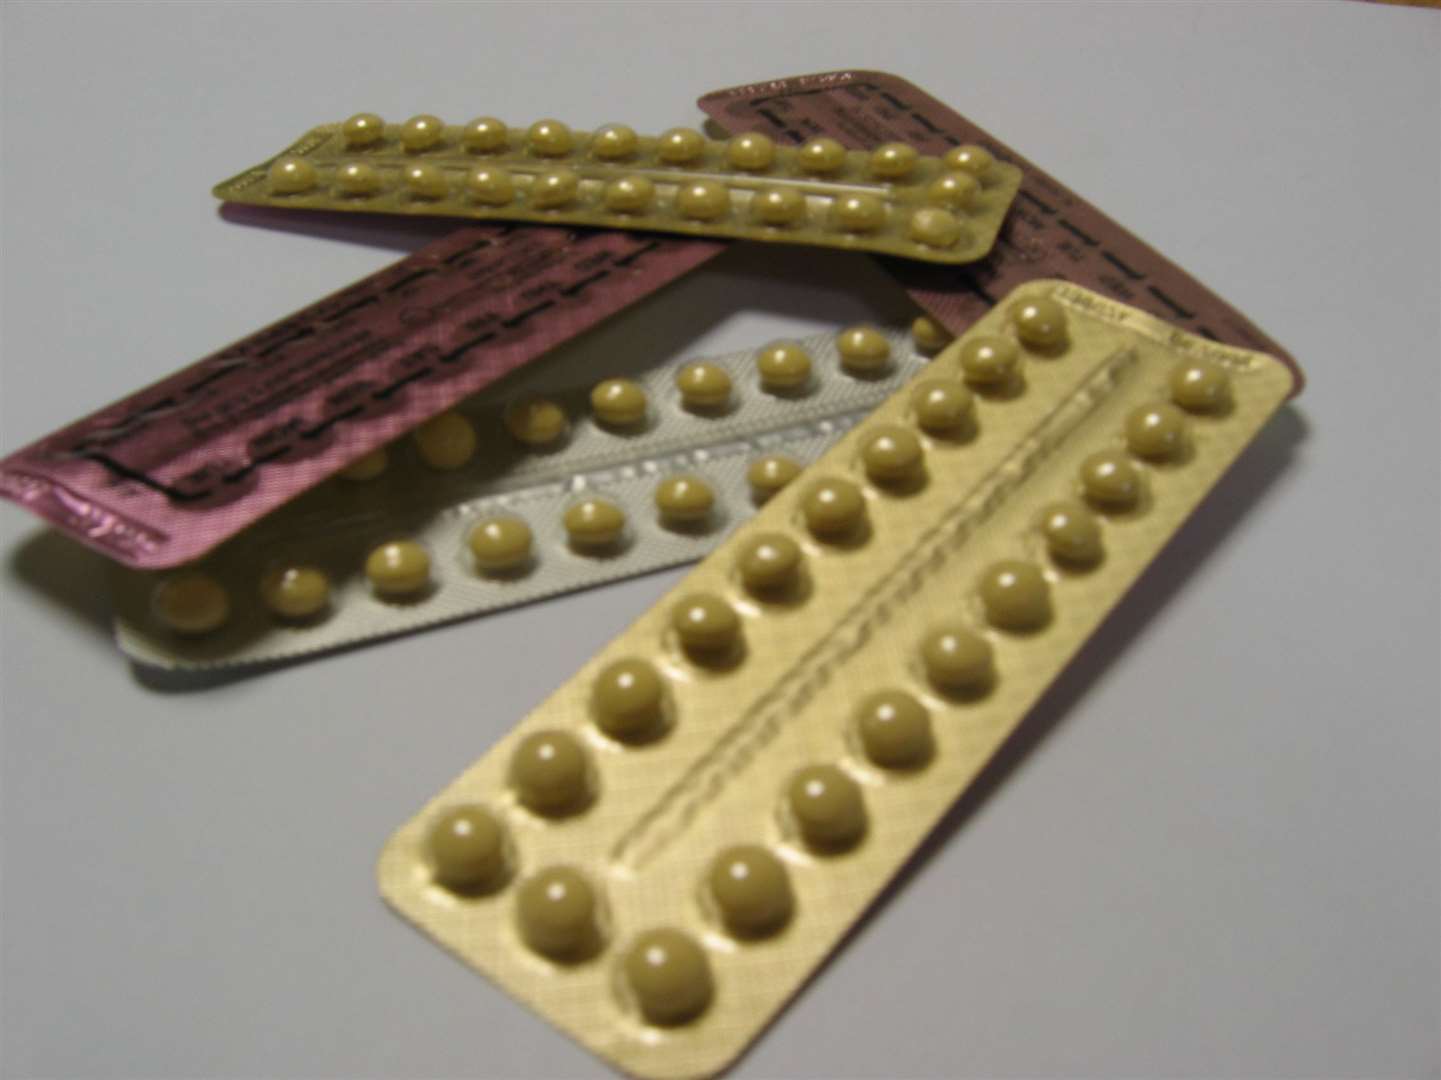 There has been a lack of investment in contraceptive services over the past few decades. Stock picture